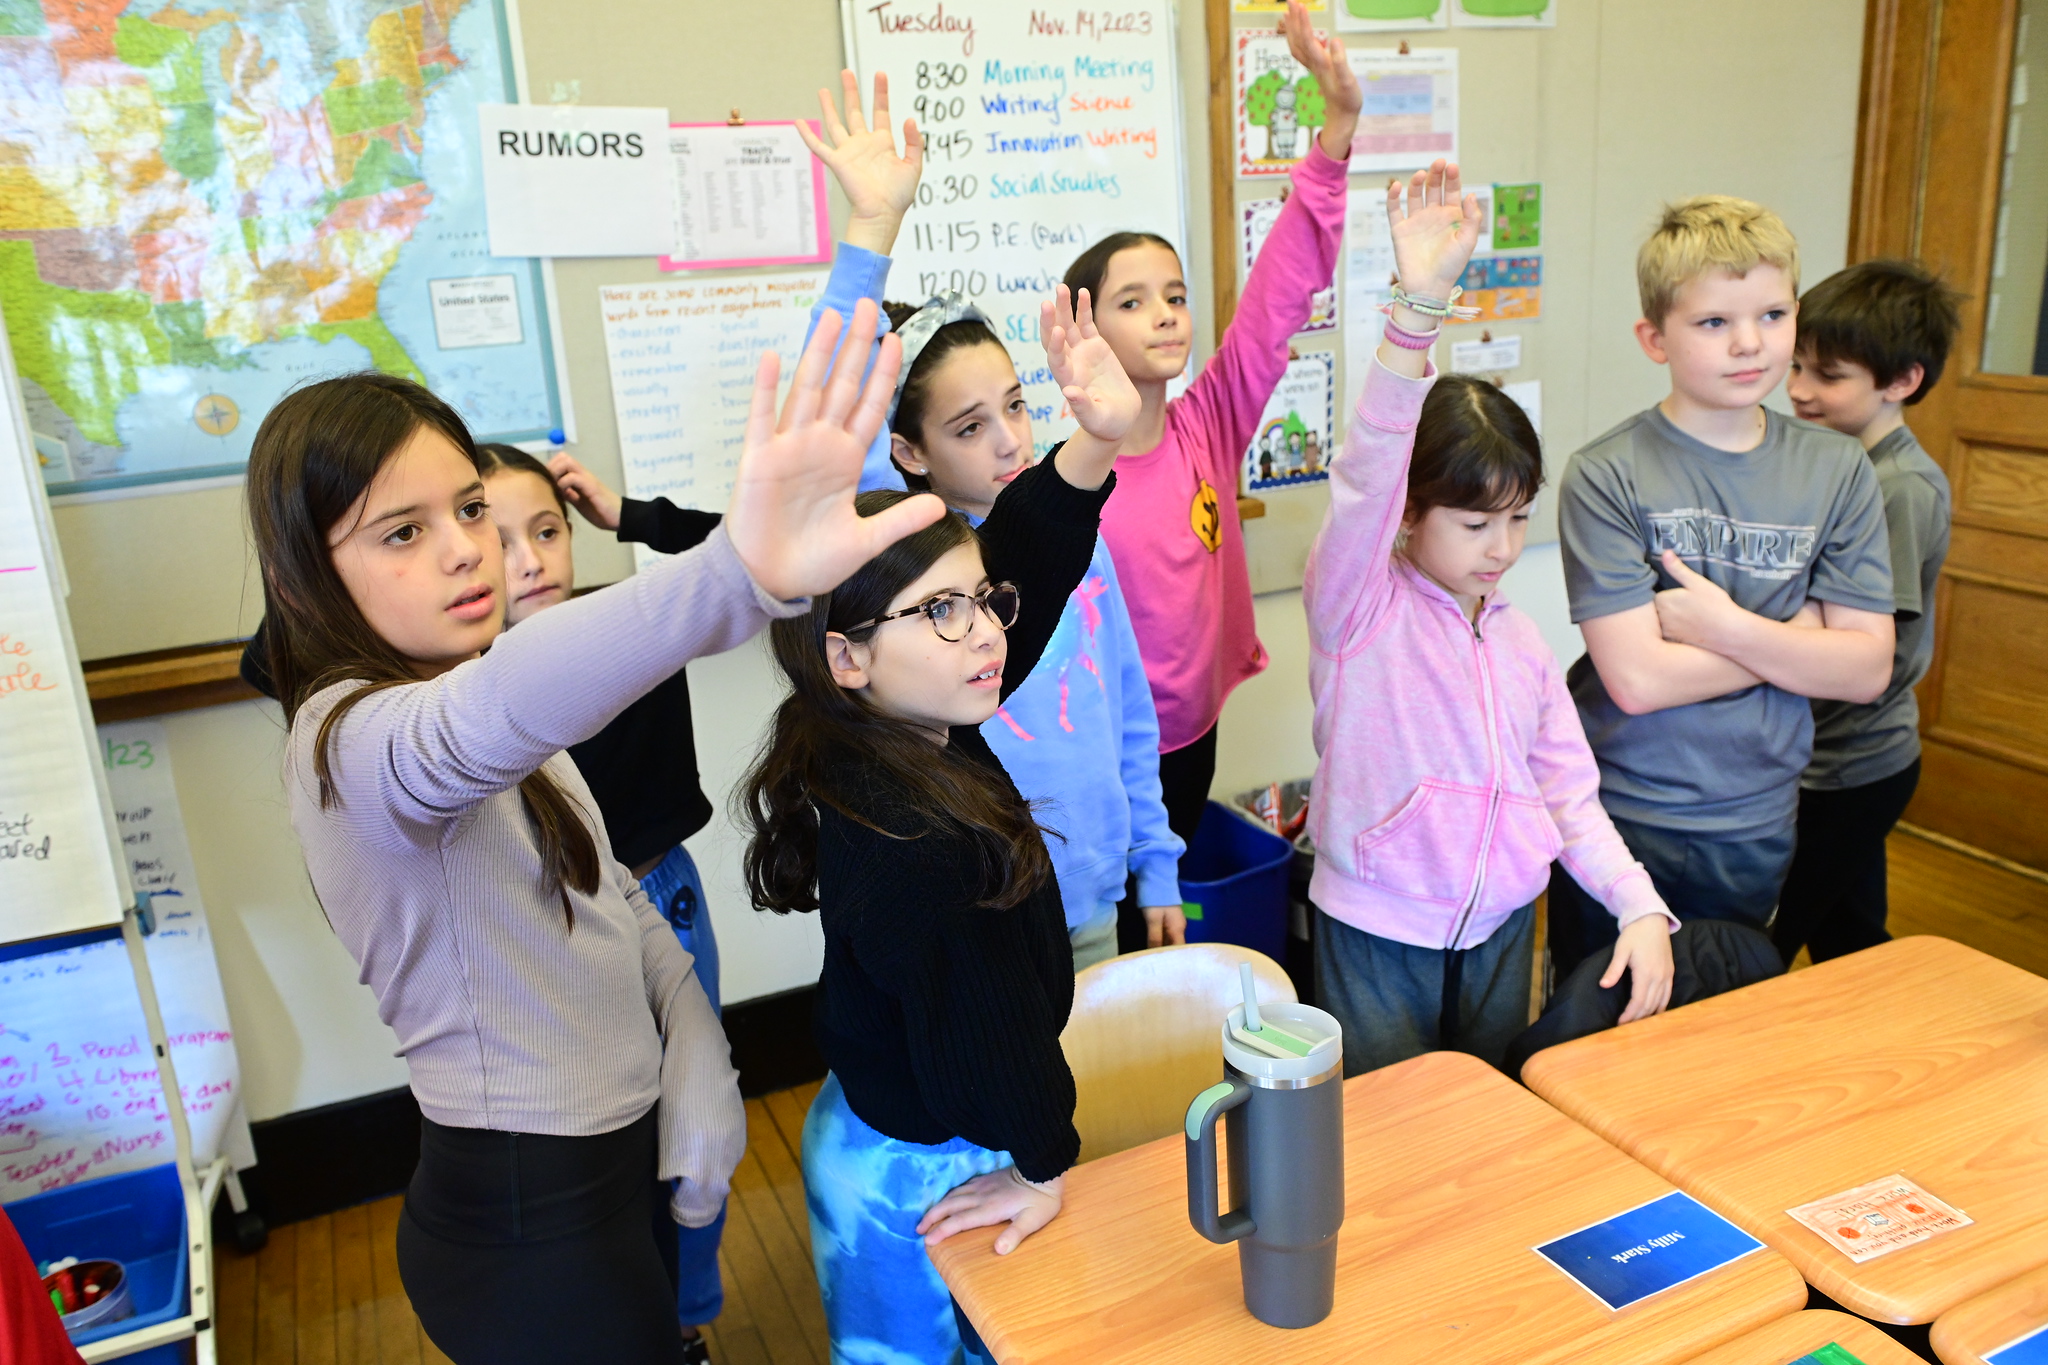 Students raise hands while discussing rumors and gossip as part of Owning Up curriculum at Ethical Culture.